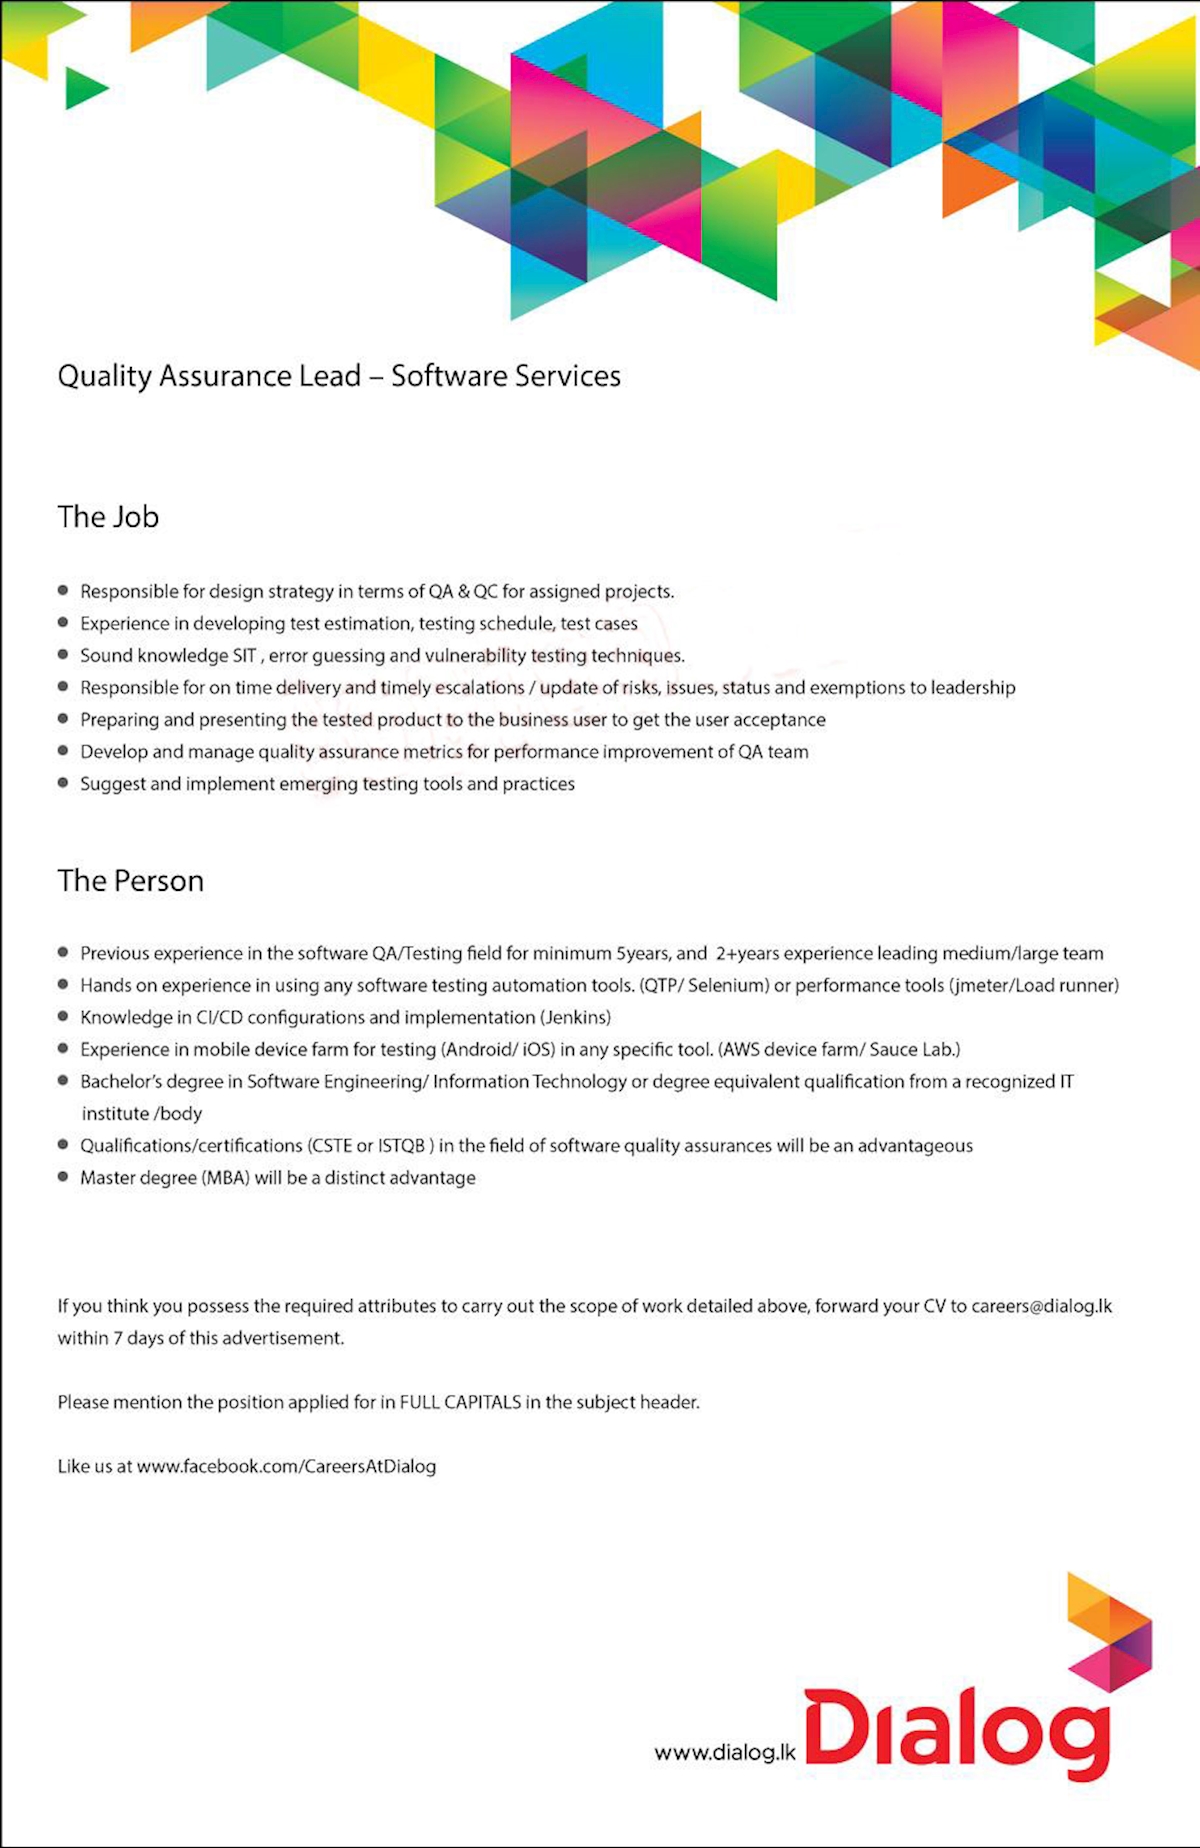 Quality Assurance Lead - Software Services 